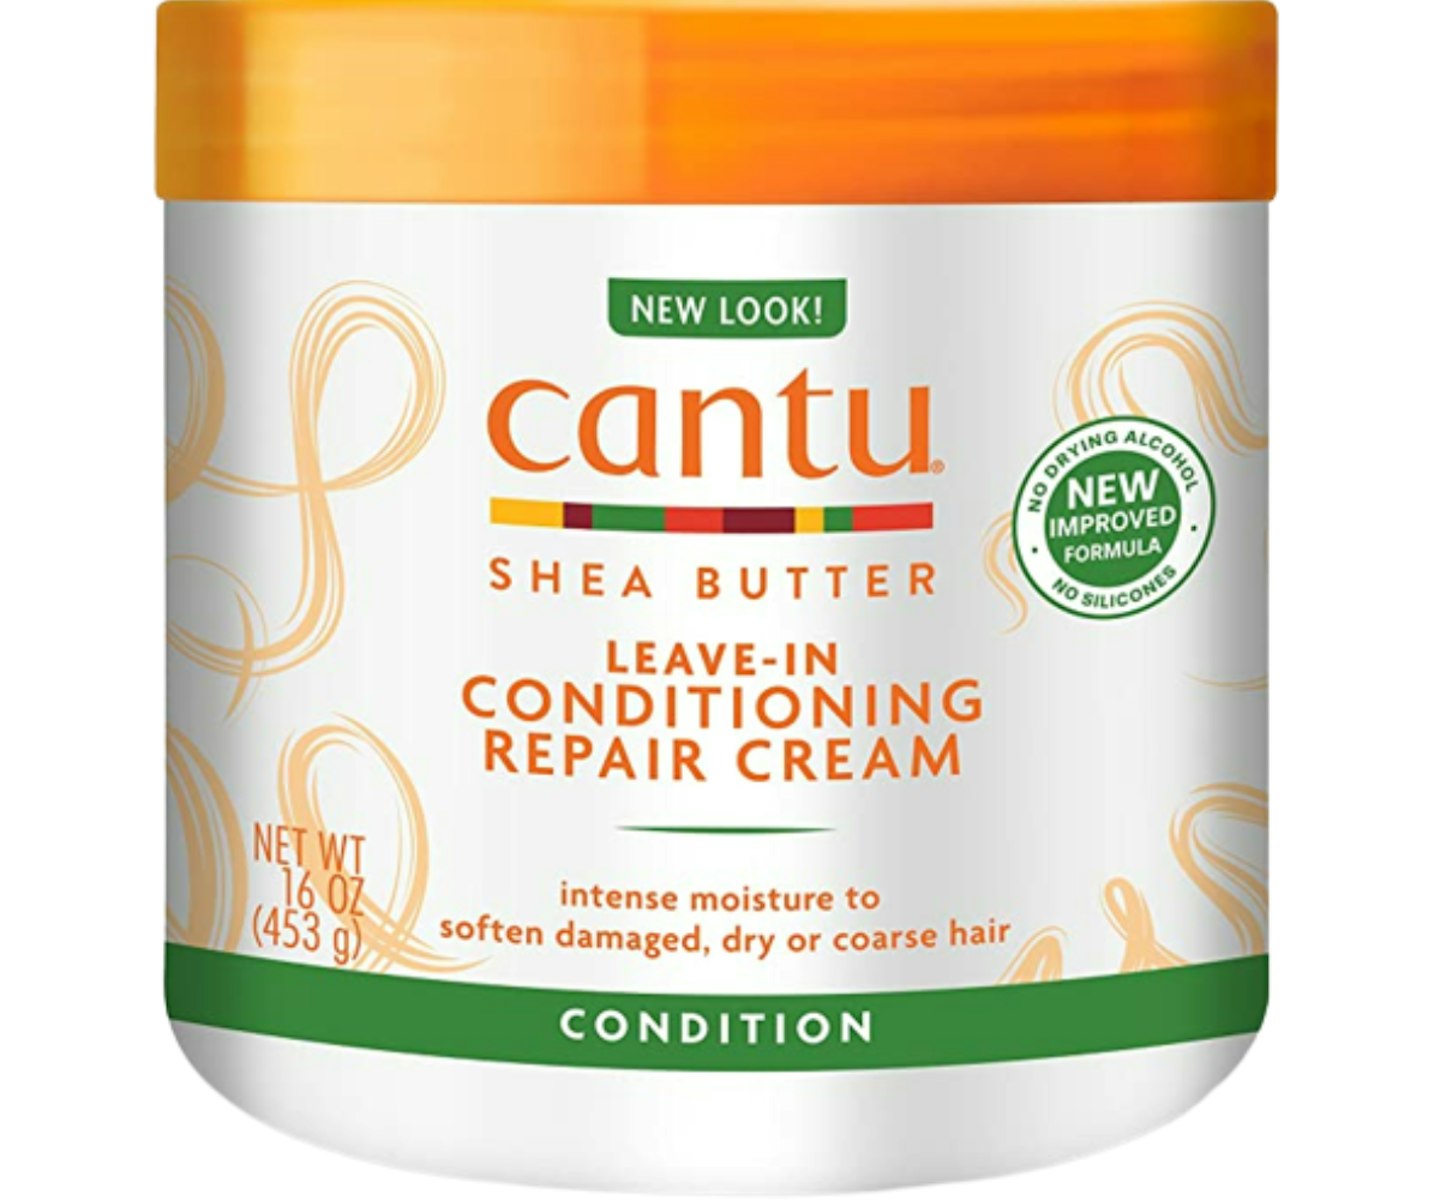 A picture of the Cantu Leave-In Conditioning Repair Cream